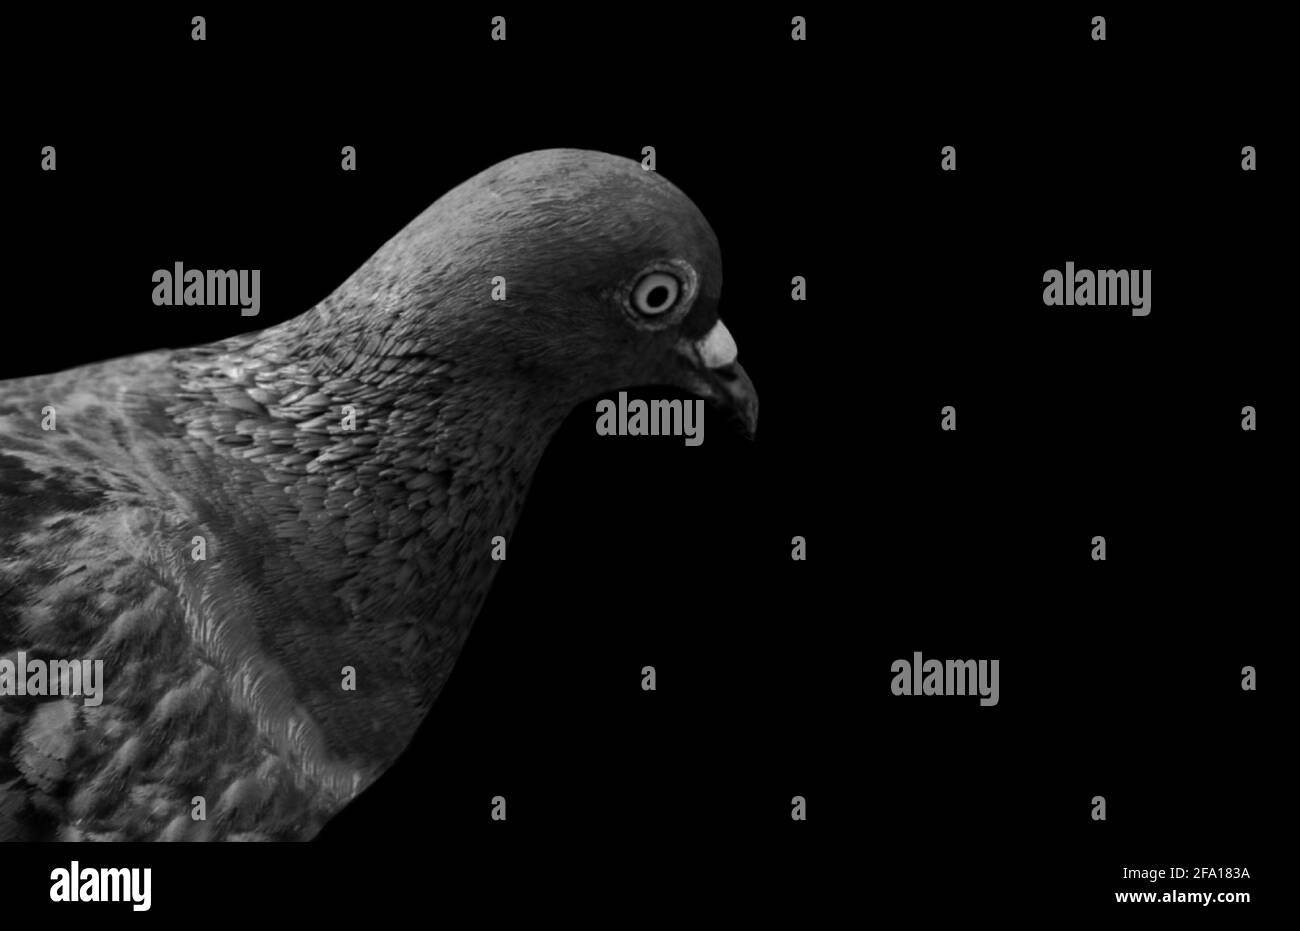 Beautiful Black And White Pigeon Face Stock Photo